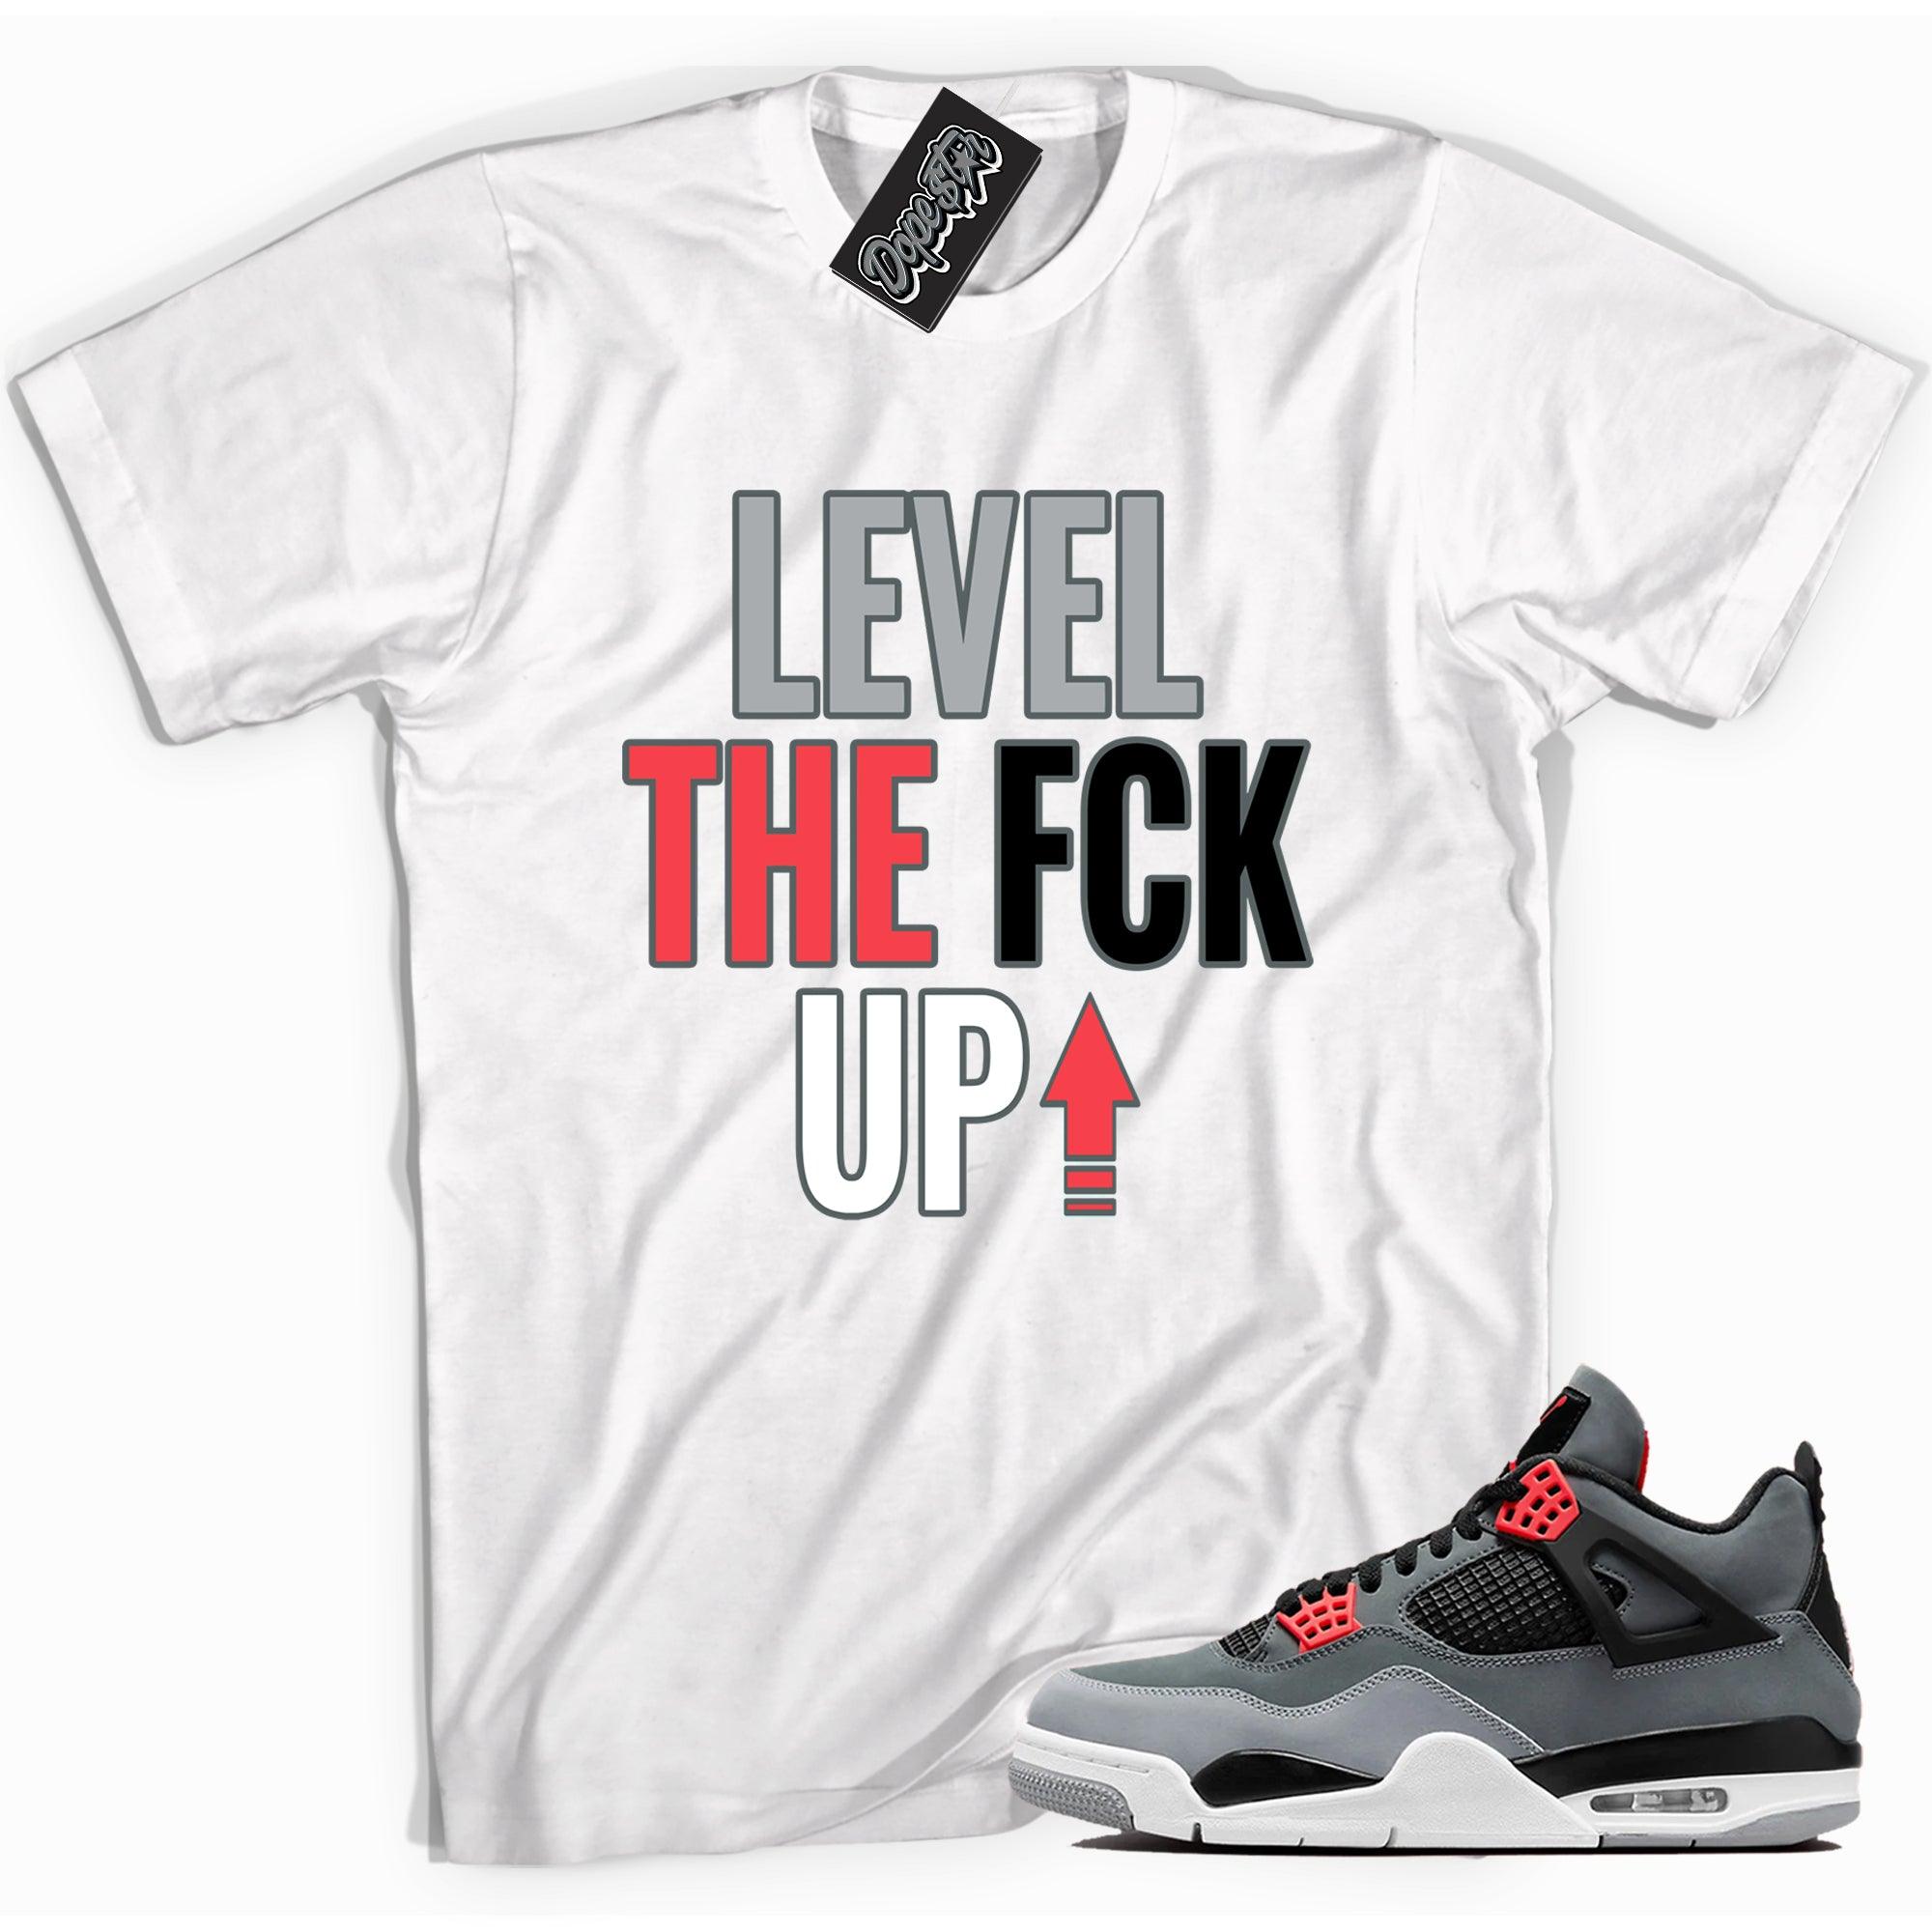 Cool white graphic tee with 'Level Up' print, that perfectly matches Air Jordan 4 Infrared Toe sneakers.